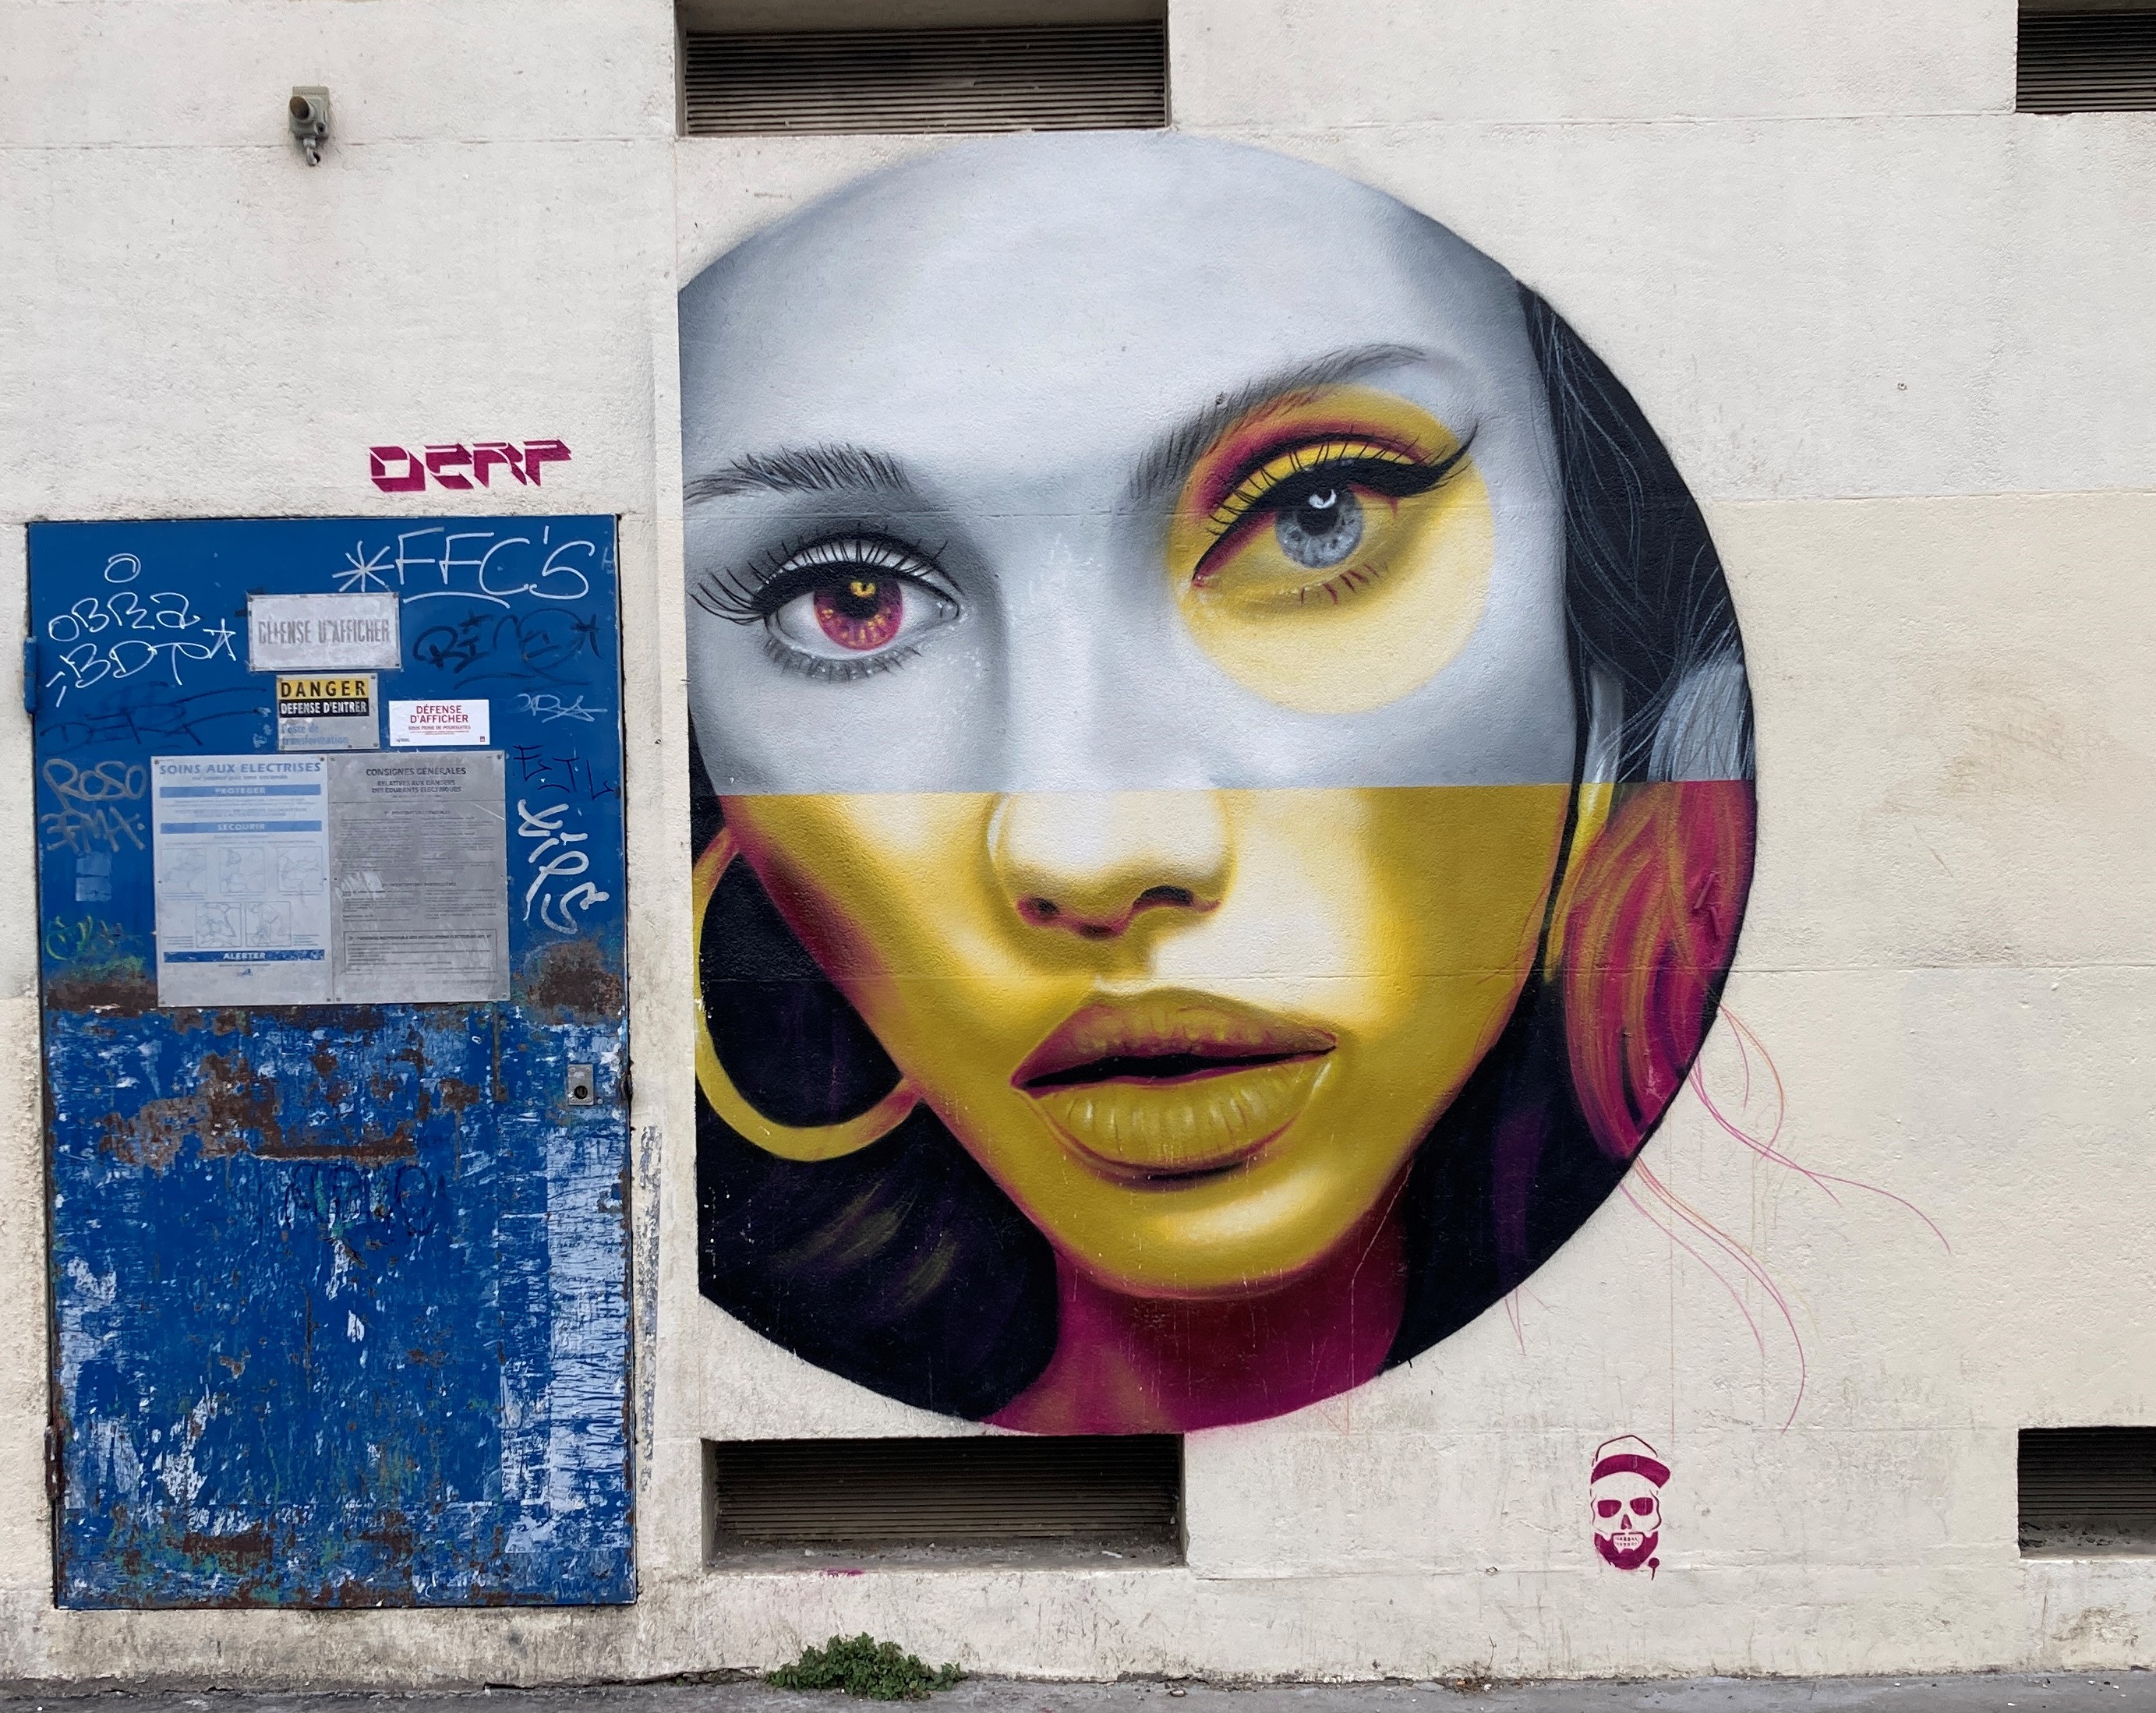 Graffiti 6866  by the artist Derf captured by Mephisroth in Bordeaux France